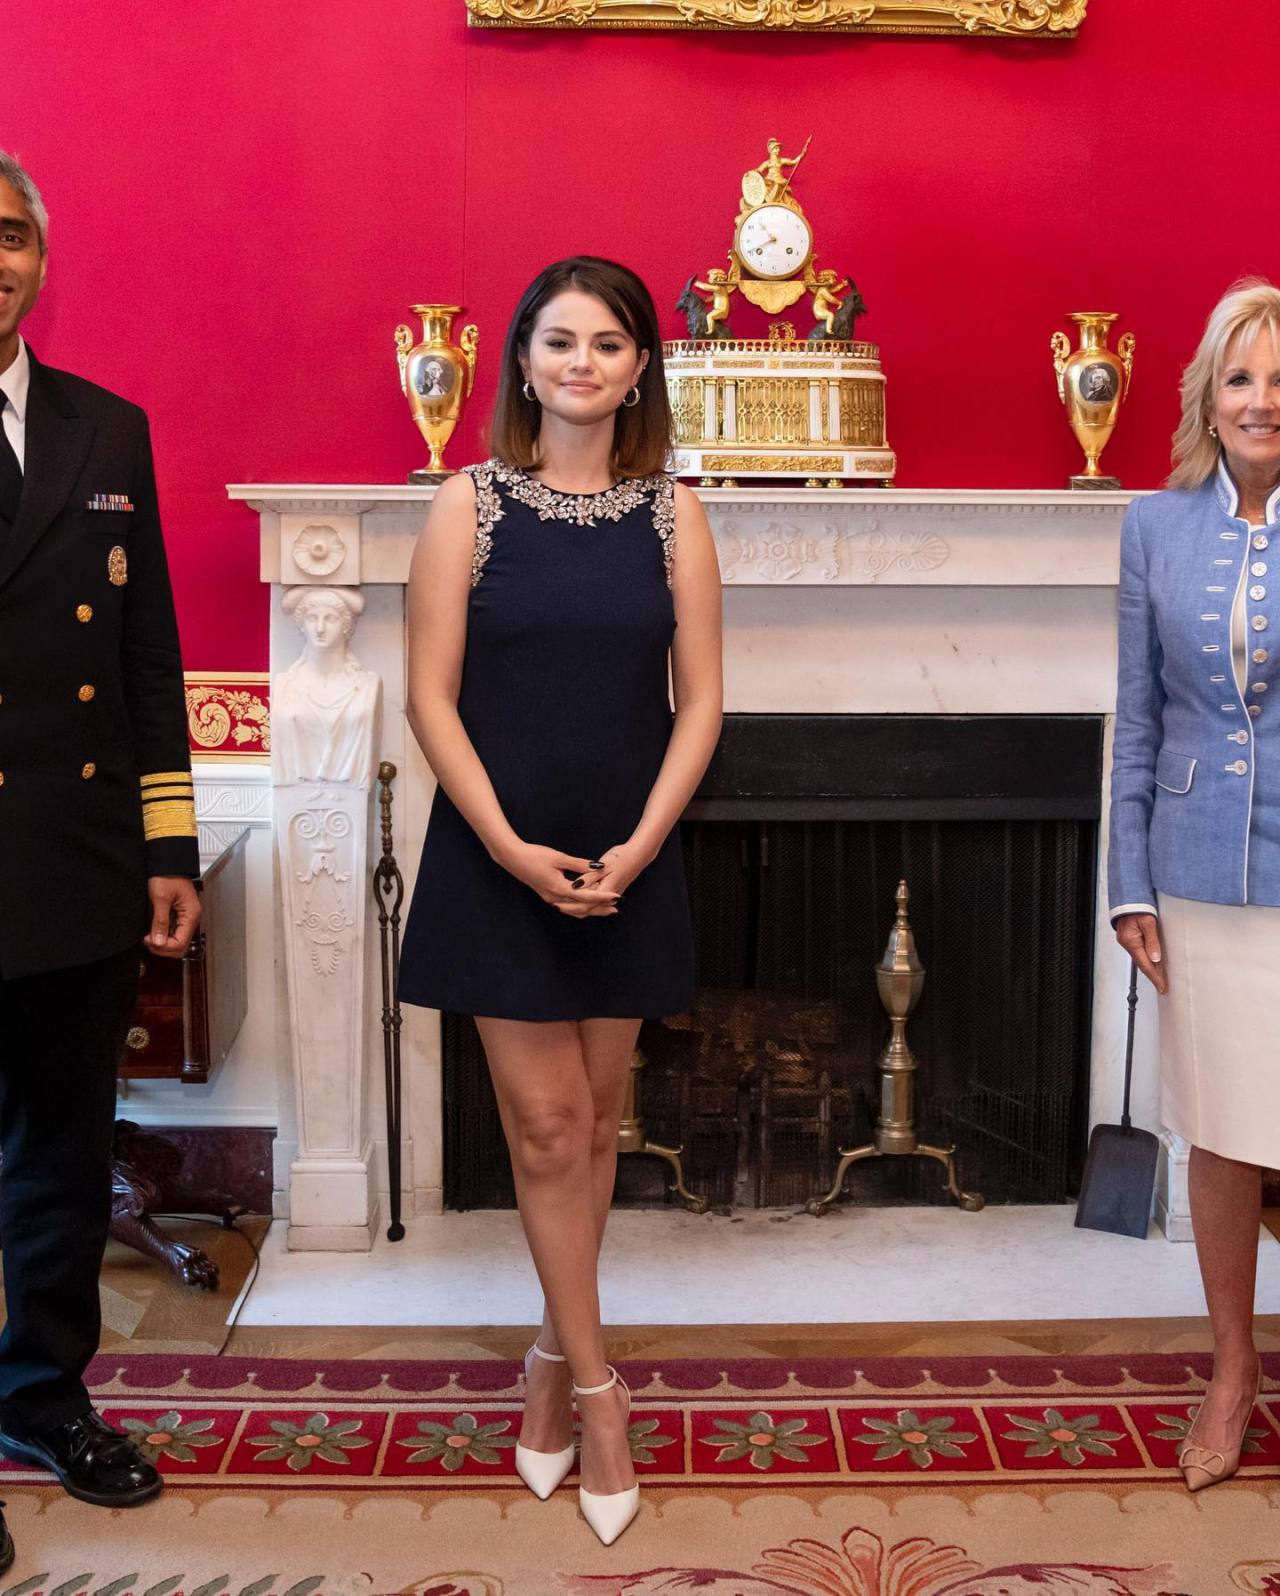 New Picture Of Selena Gomez With The President Joe Biden, And With First Lady Jill Biden And Dr. Vivek Murthy, At The White House #selena gomez#jill biden#vivek murthy